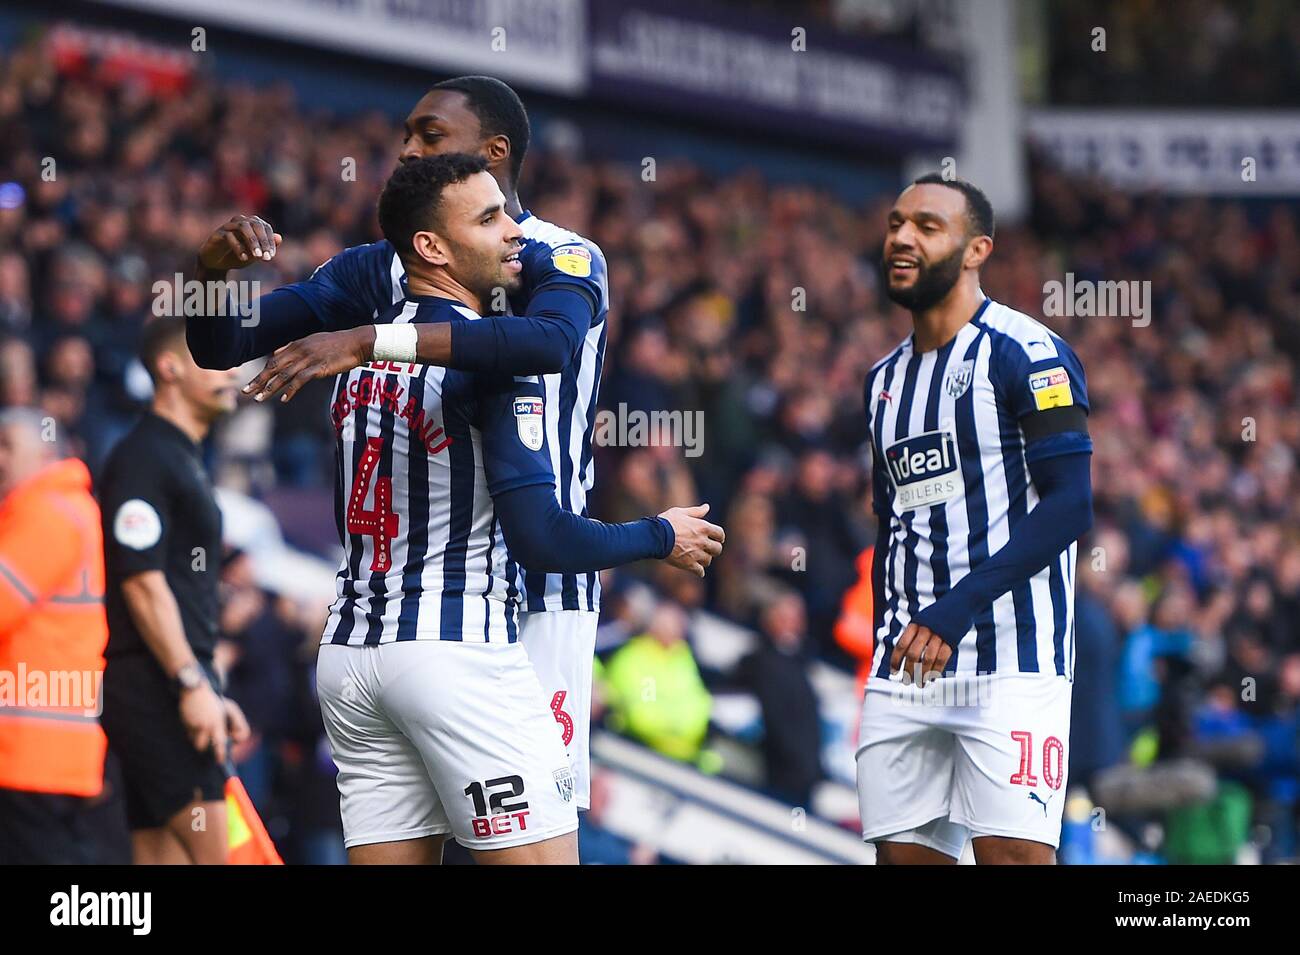 8th December 2019, The Hawthorns, West Bromwich, England; Sky Bet Championship, West Bromwich Albion v Swansea City : Semi Ajayi (6) of West Bromwich Albion, Matt Phillips (10) of West Bromwich Albion celebrate with goal scorer Hal Robson-Kanu (4) of West Bromwich Albion Credit: Gareth Dalley/News Images Stock Photo